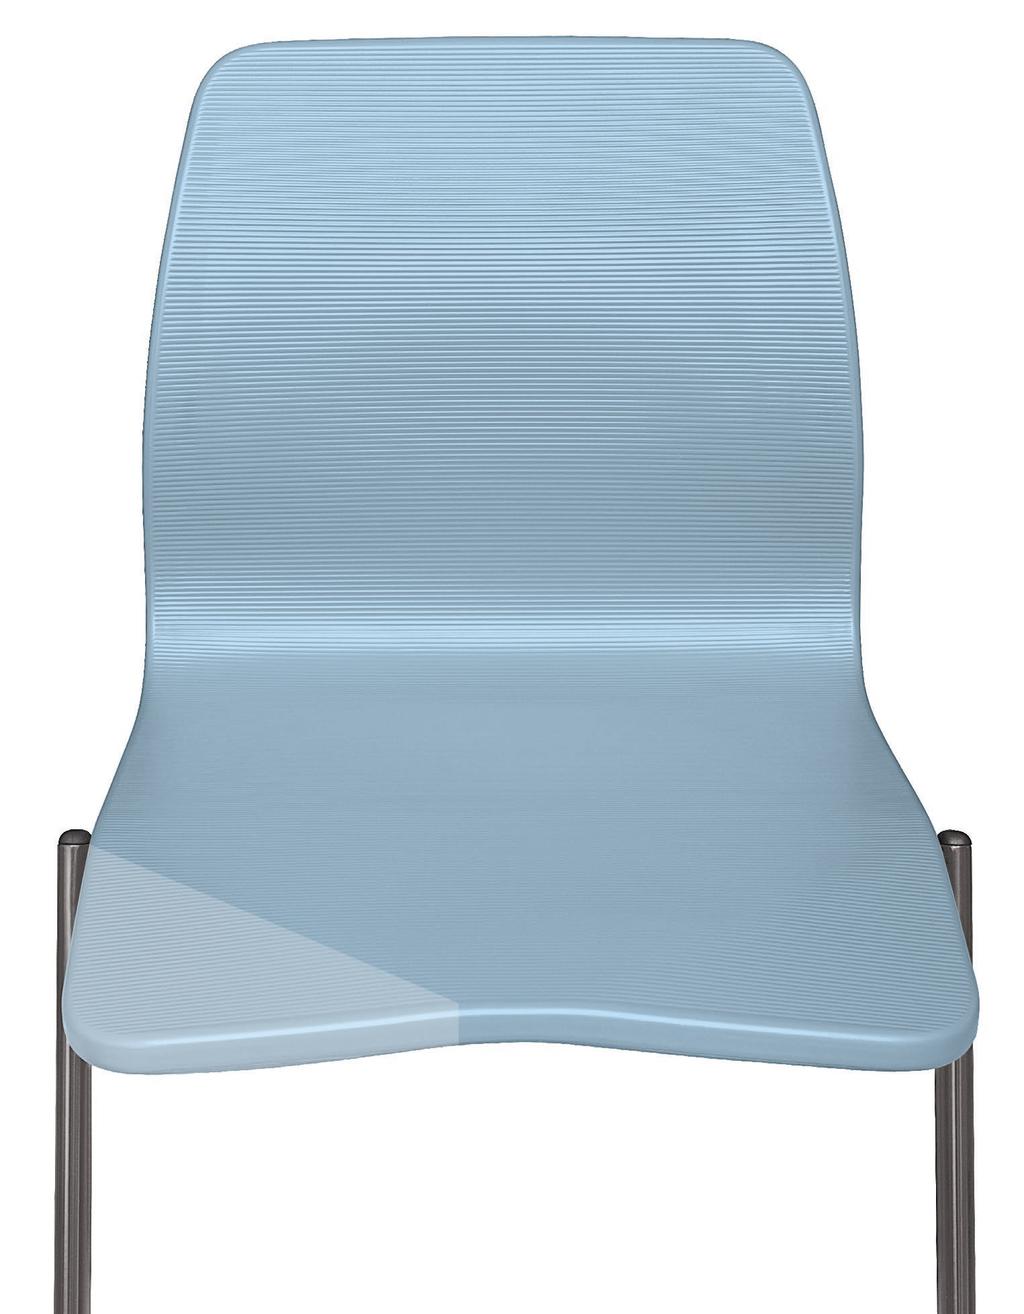 Chair Comfort & Ergonomics The Opti+ chair features a